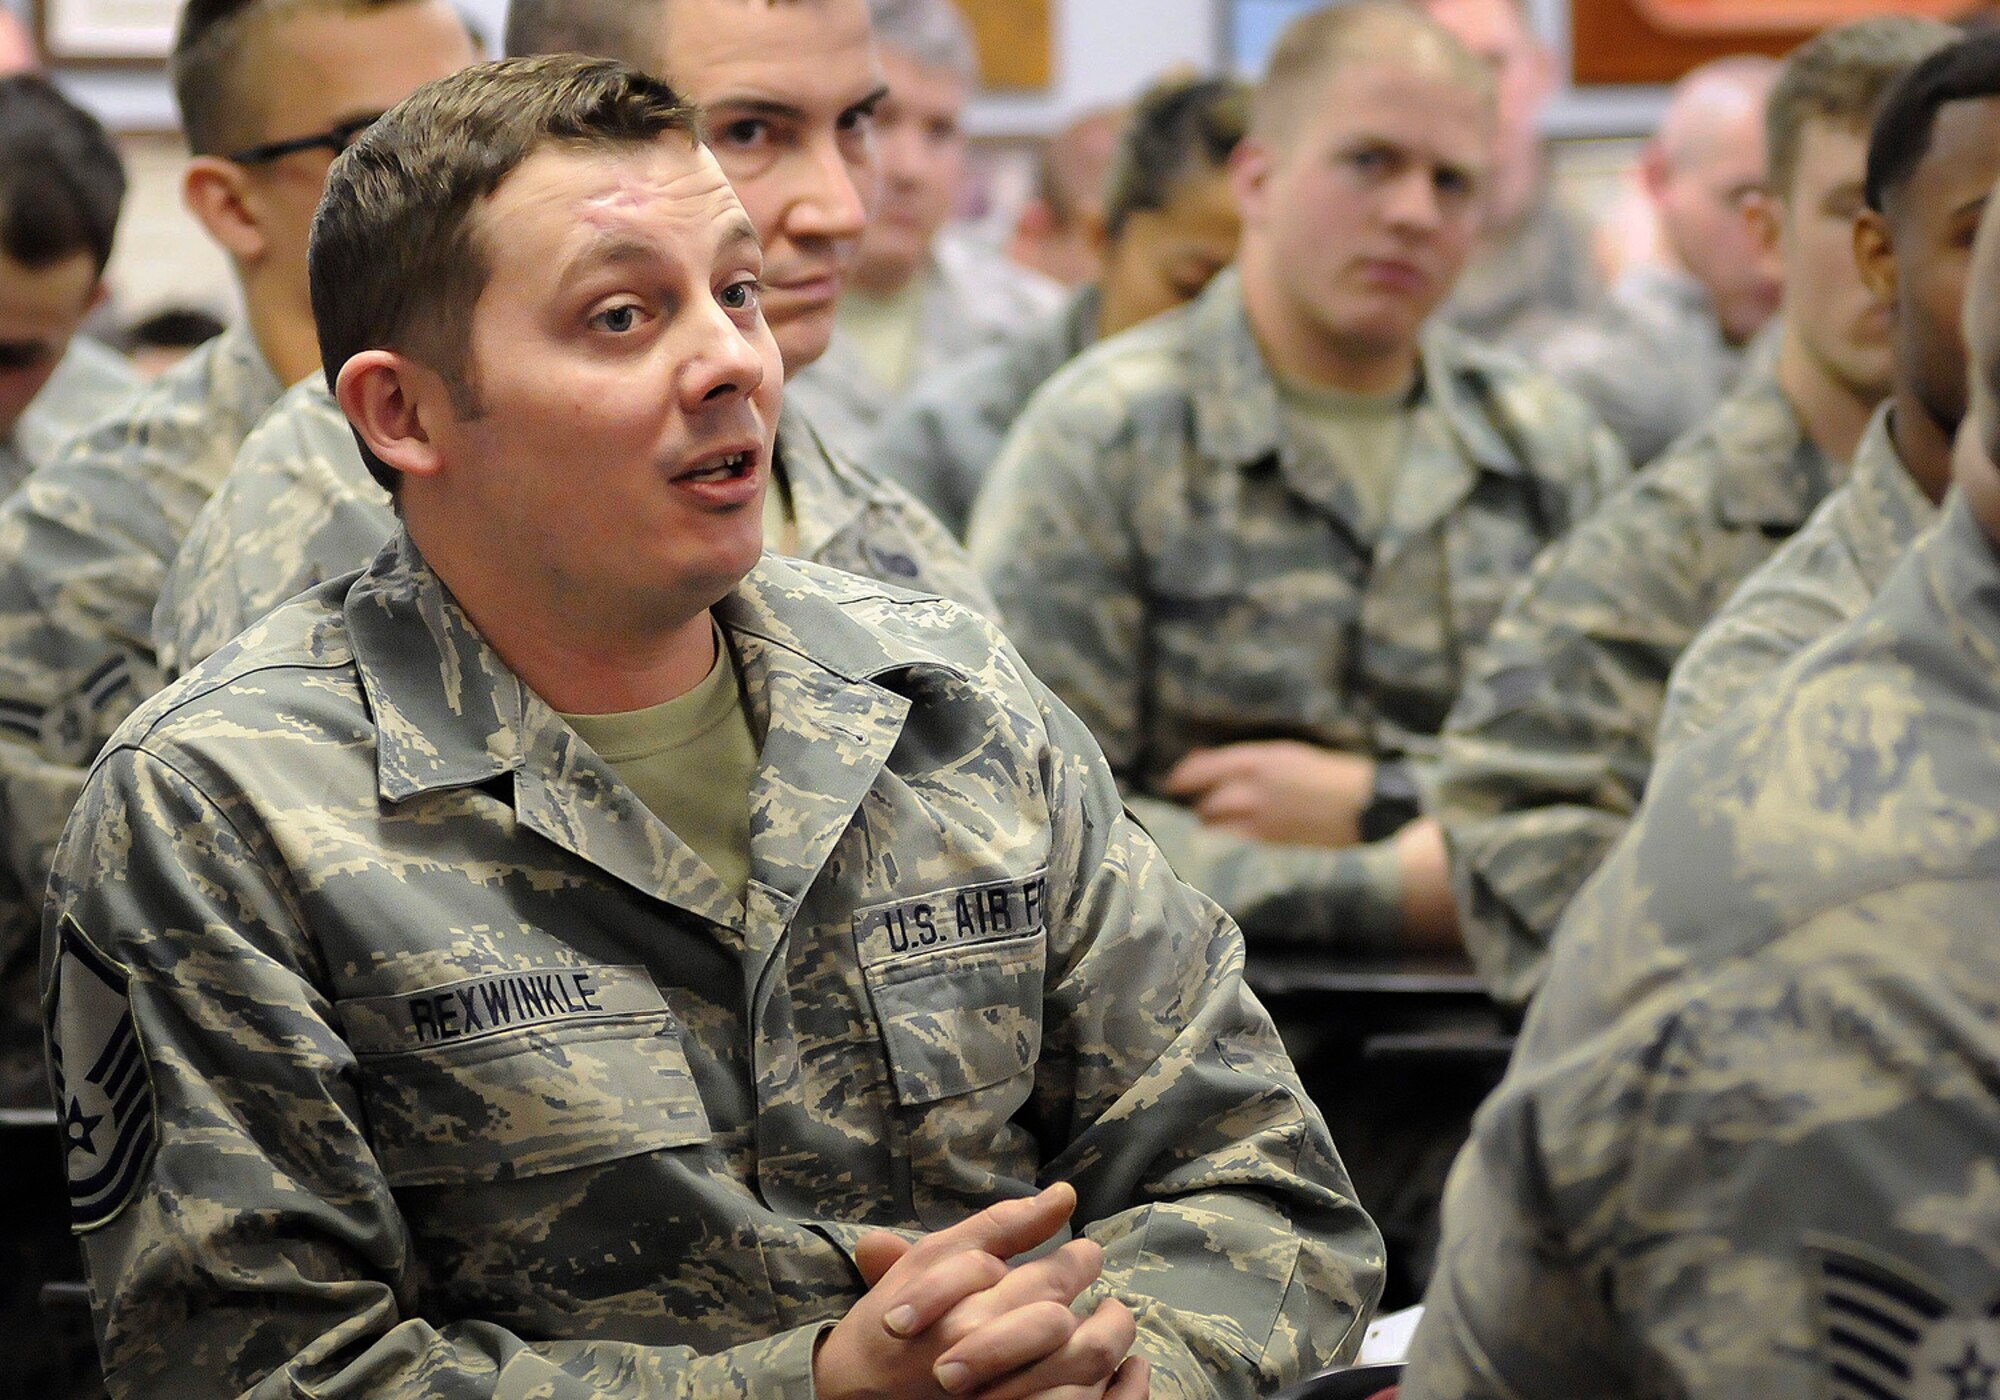 Master Sgt. Christopher Rexwinkle, 138th Civil Engineering Squadron, speaks to the 138th Fighter Wing commander and command chief during a wing commander's town hall meeting 7 March 2015, at the Tulsa Air National Guard base, Okla.   The command staff visited select units on the installation, and plan on rotating visitations throughout all the organizations during future UTA’s.  (U.S. National Guard photo by Tech. Sgt. Roberta A. Thompson/Released)